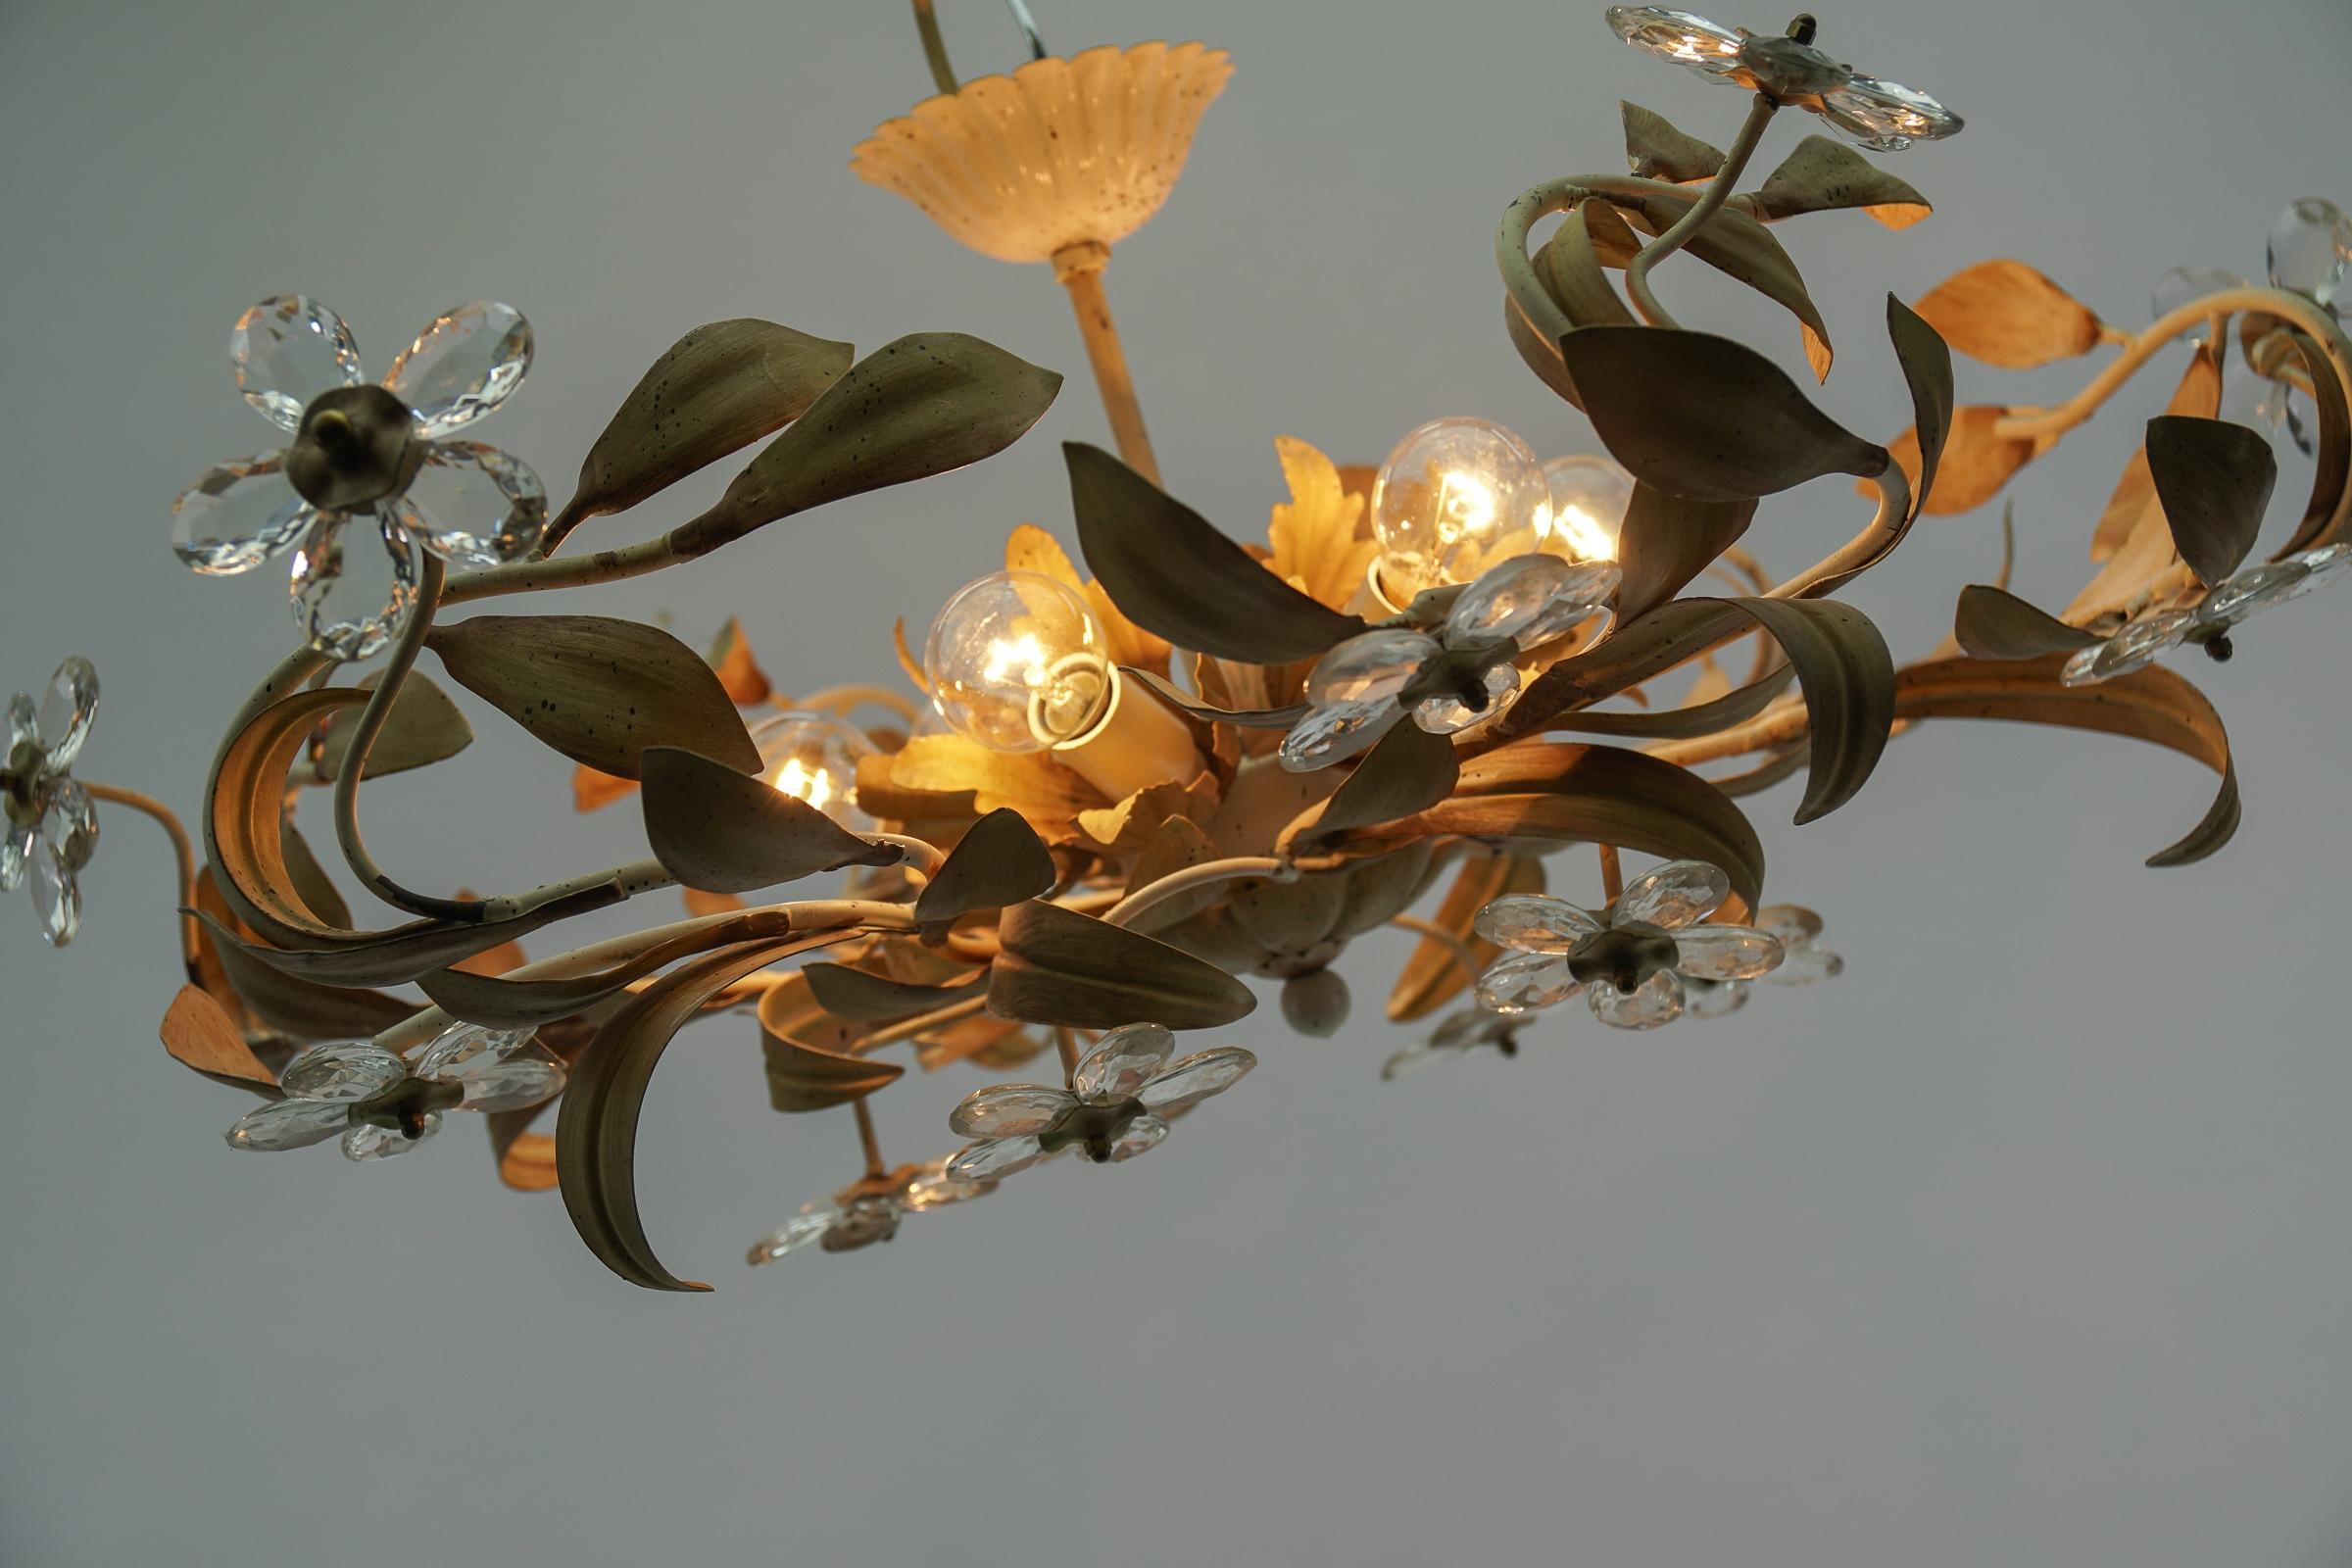 Italian Crystal Glass and Metal Florentine Ceiling Lamp by Banci Firenze, 1960s For Sale 2